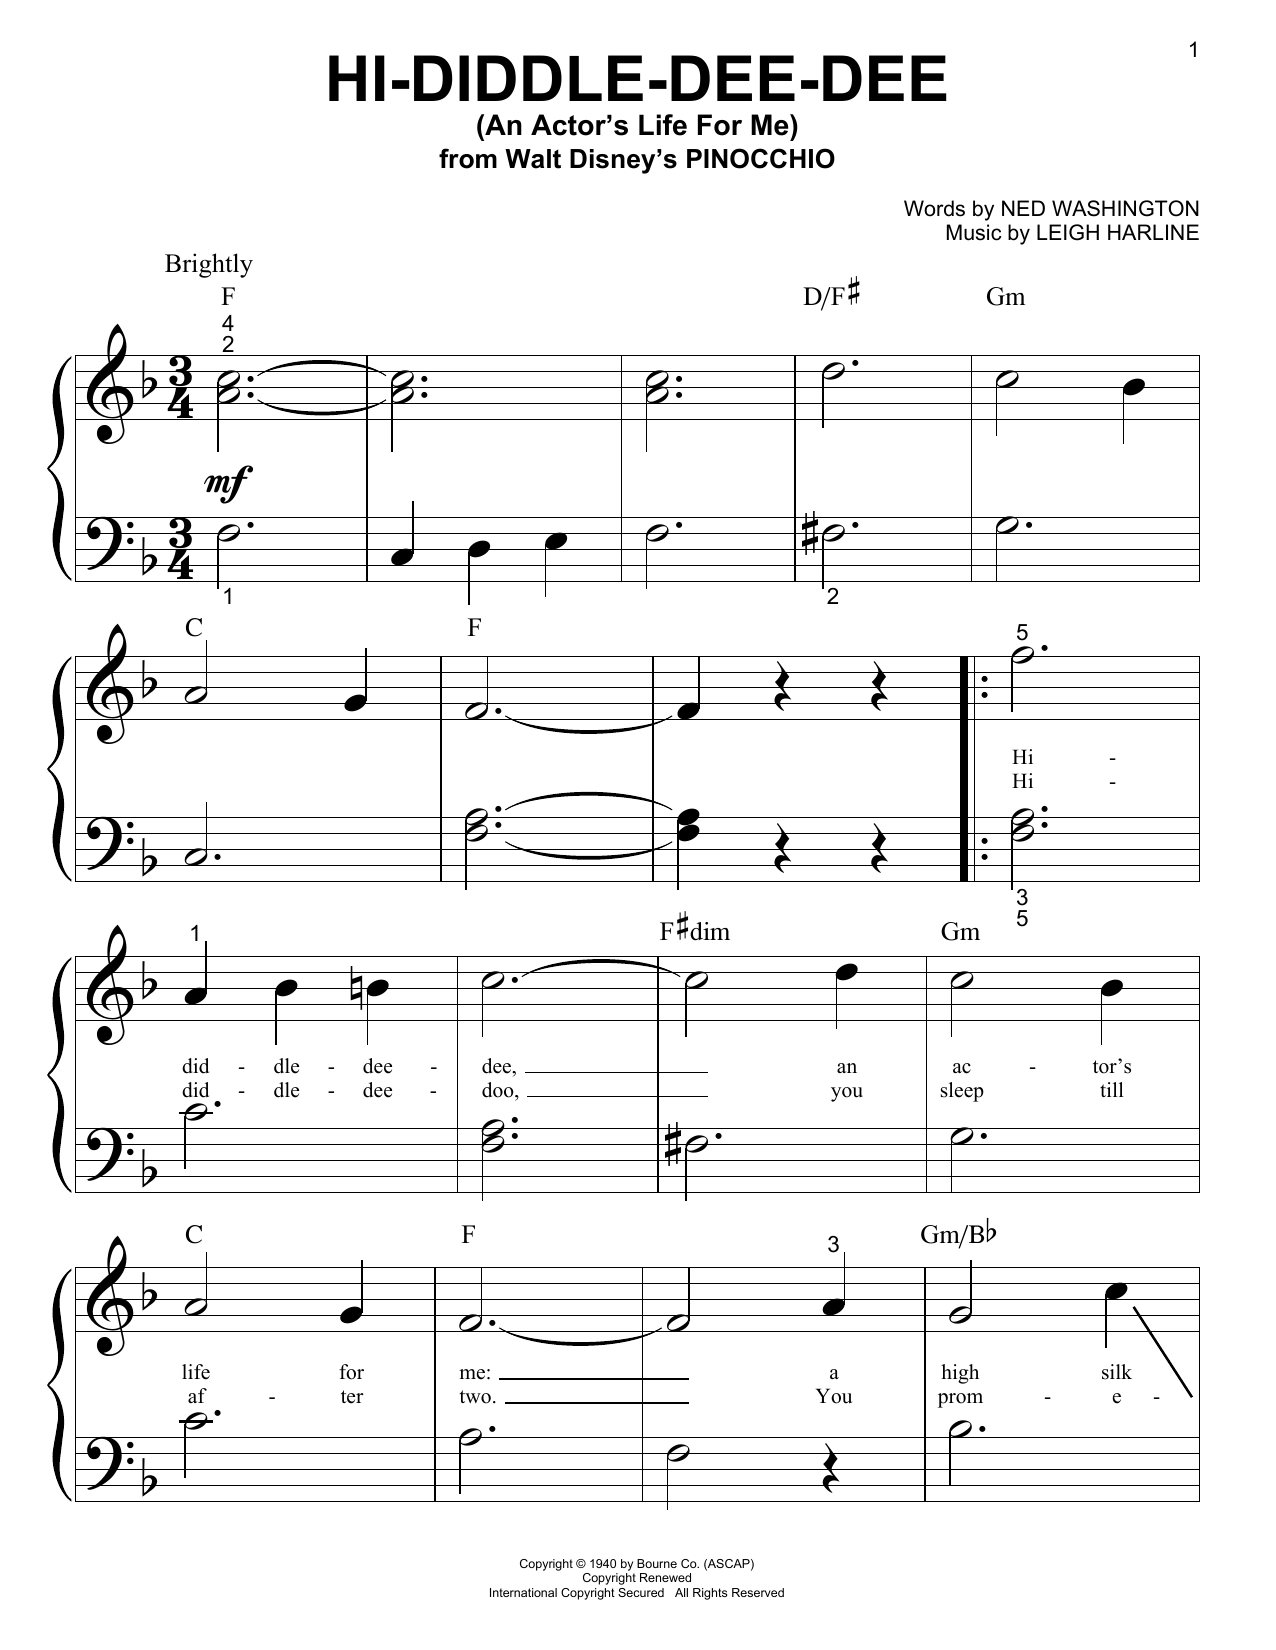 Leigh Harline Hi-Diddle-Dee-Dee (An Actor's Life For Me) sheet music notes and chords. Download Printable PDF.